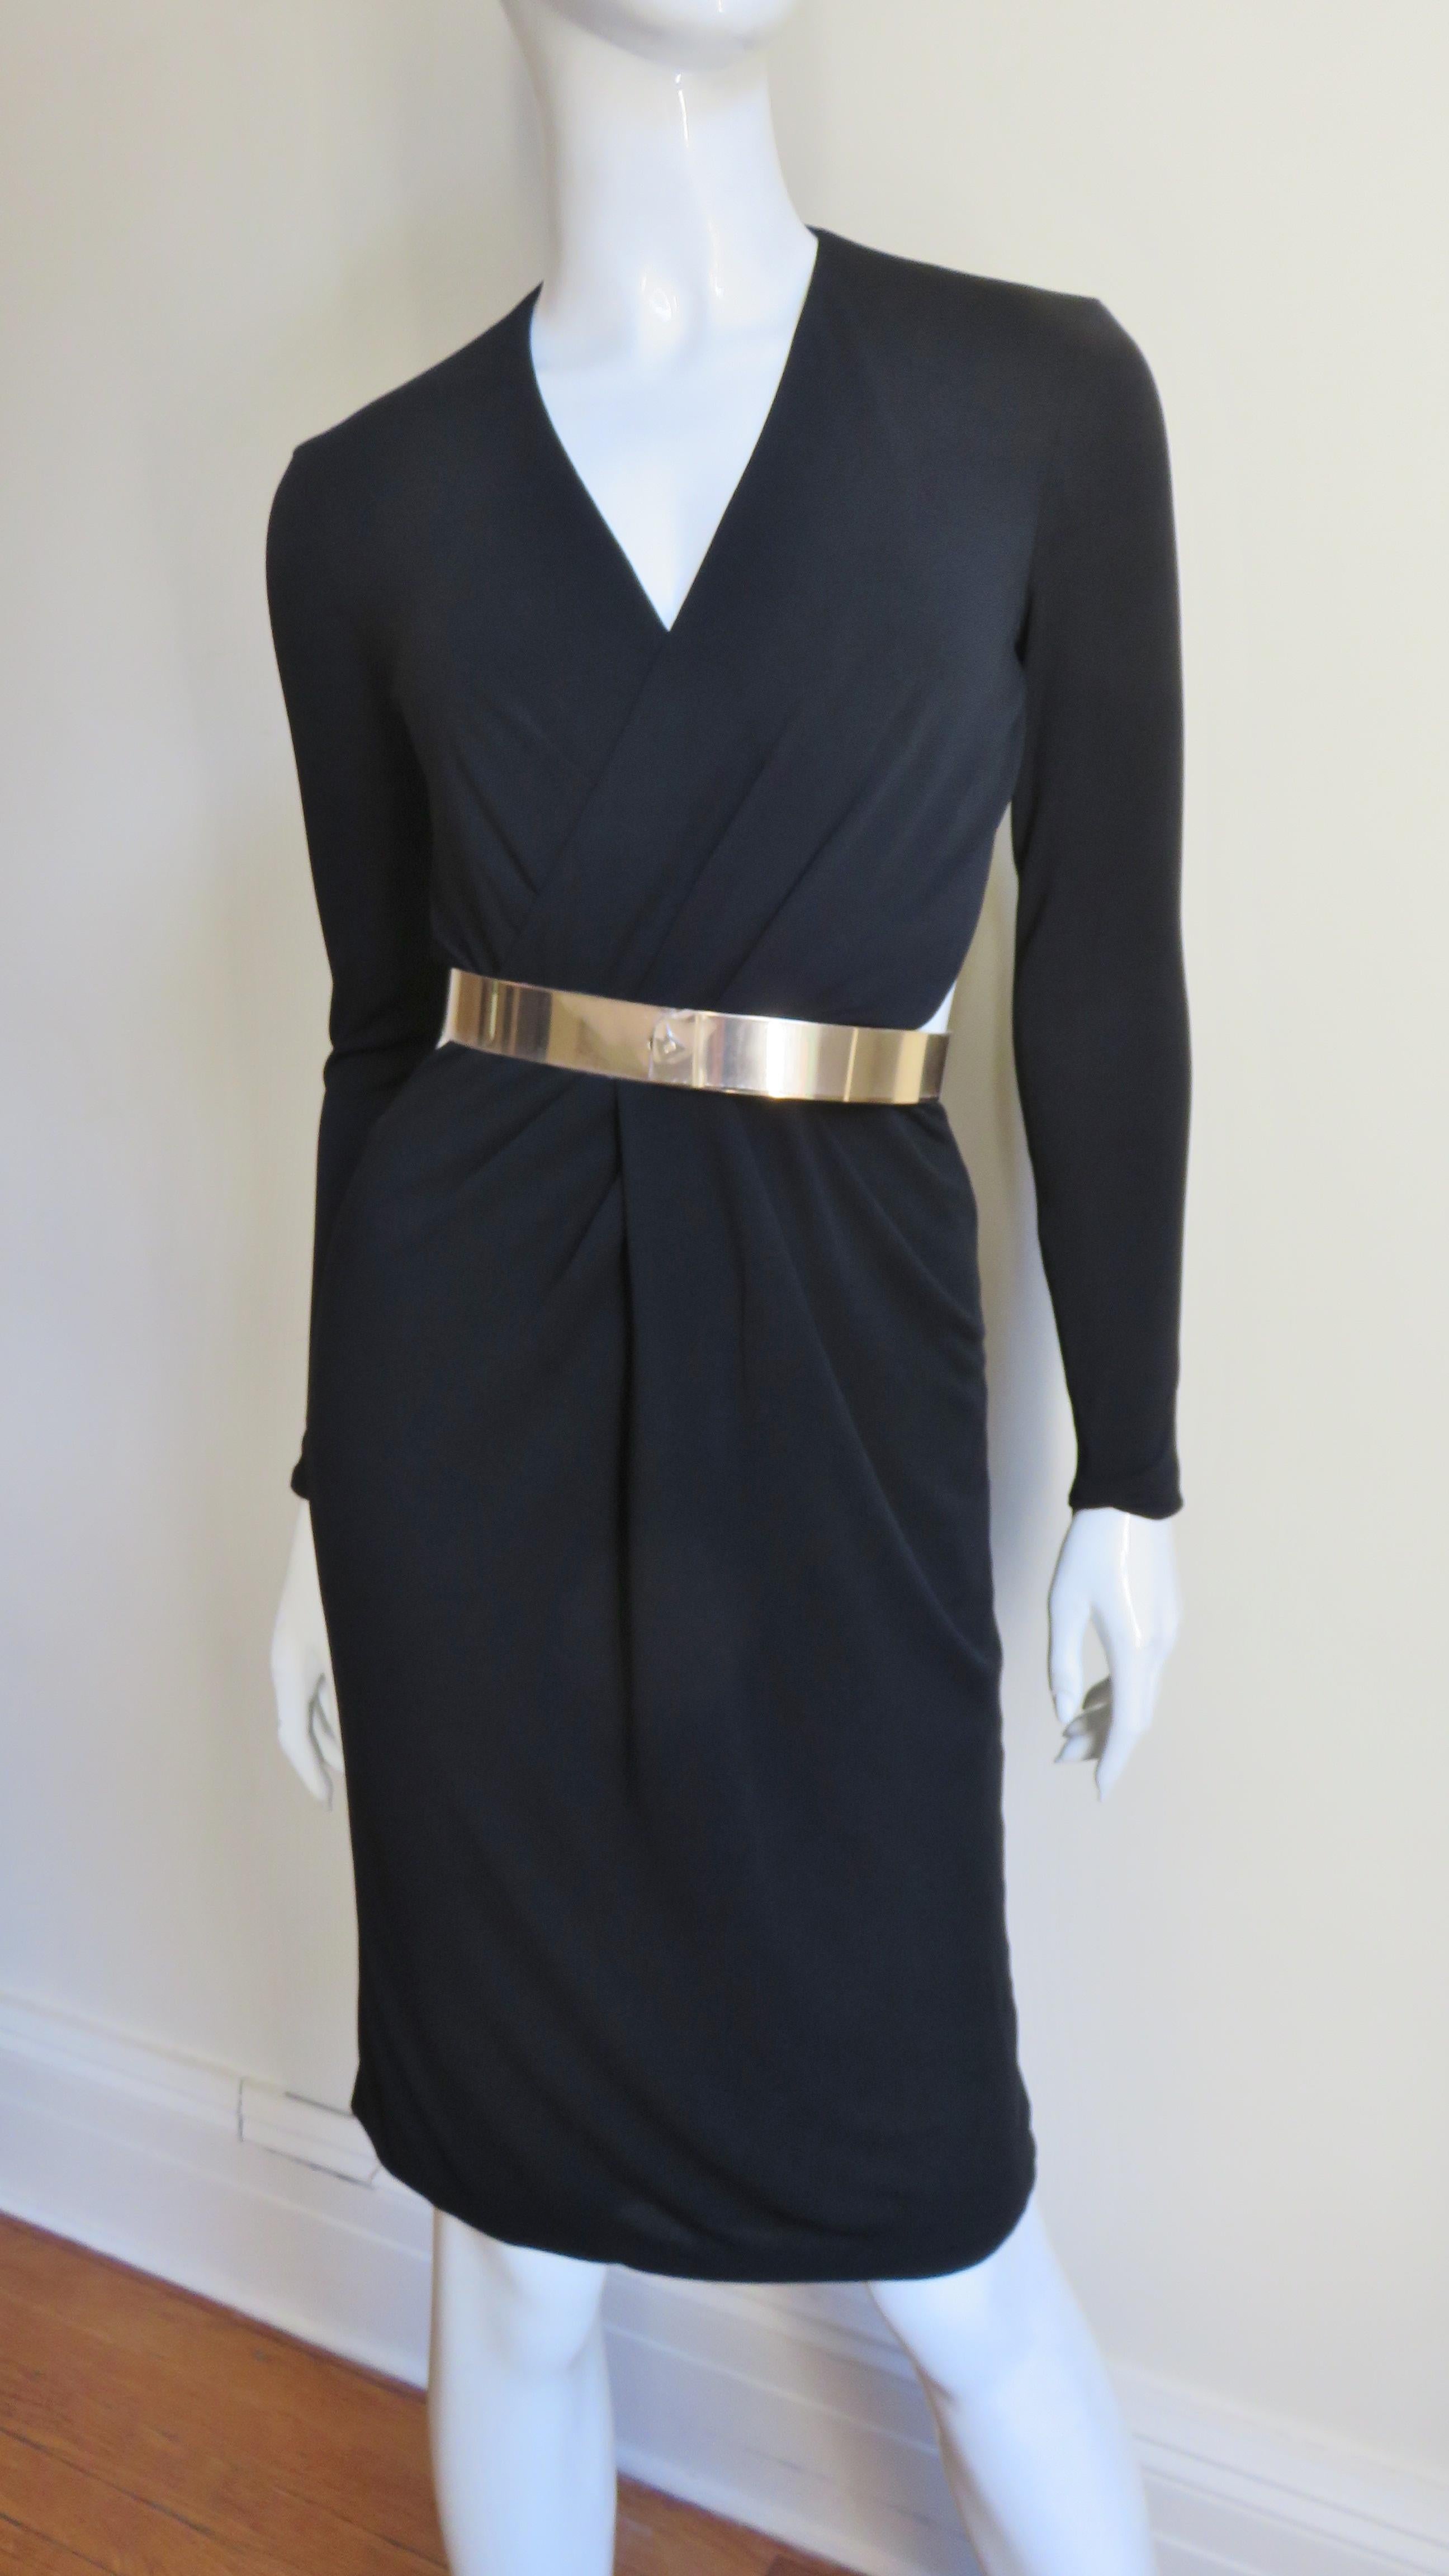 A gorgeous black silk jersey dress from Gucci.  It has a front crossing V neck, long sleeves with zippers and cut outs at the side waist.  The skirt is straight and the back is dramatically cut out from the neck to just below the waist.  It is lined